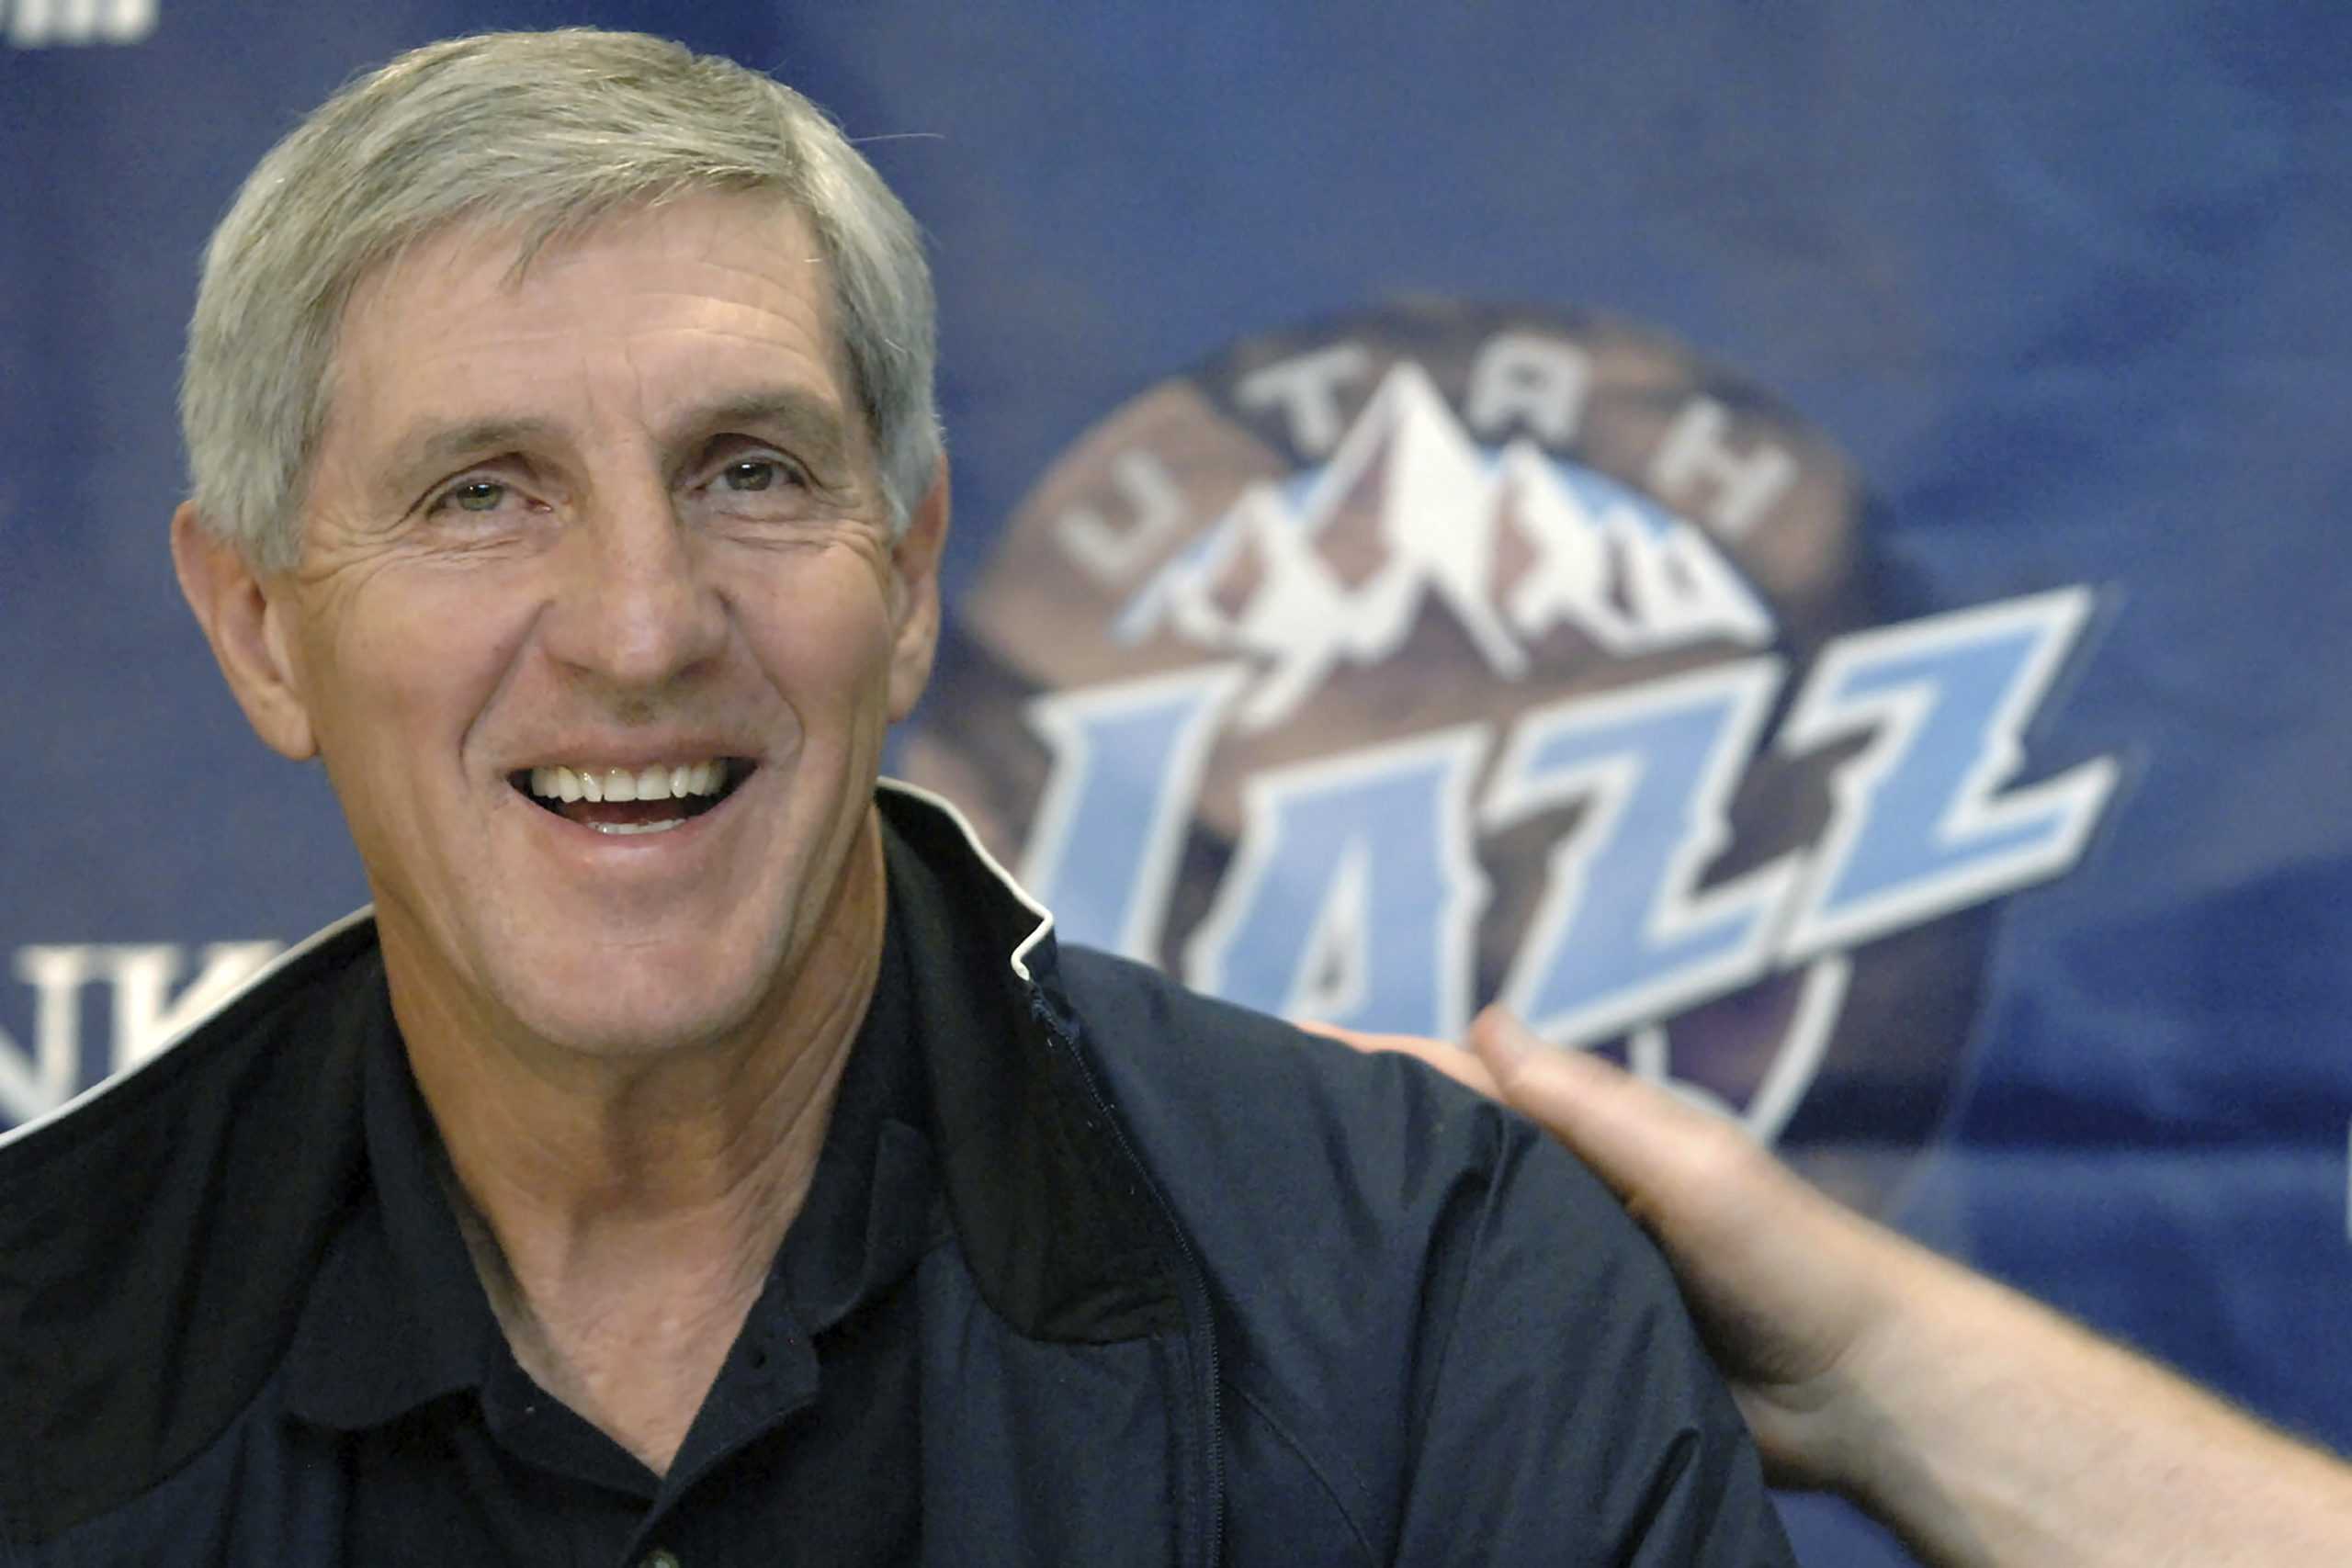  Honoring the Life and Legacy of Jerry Sloan